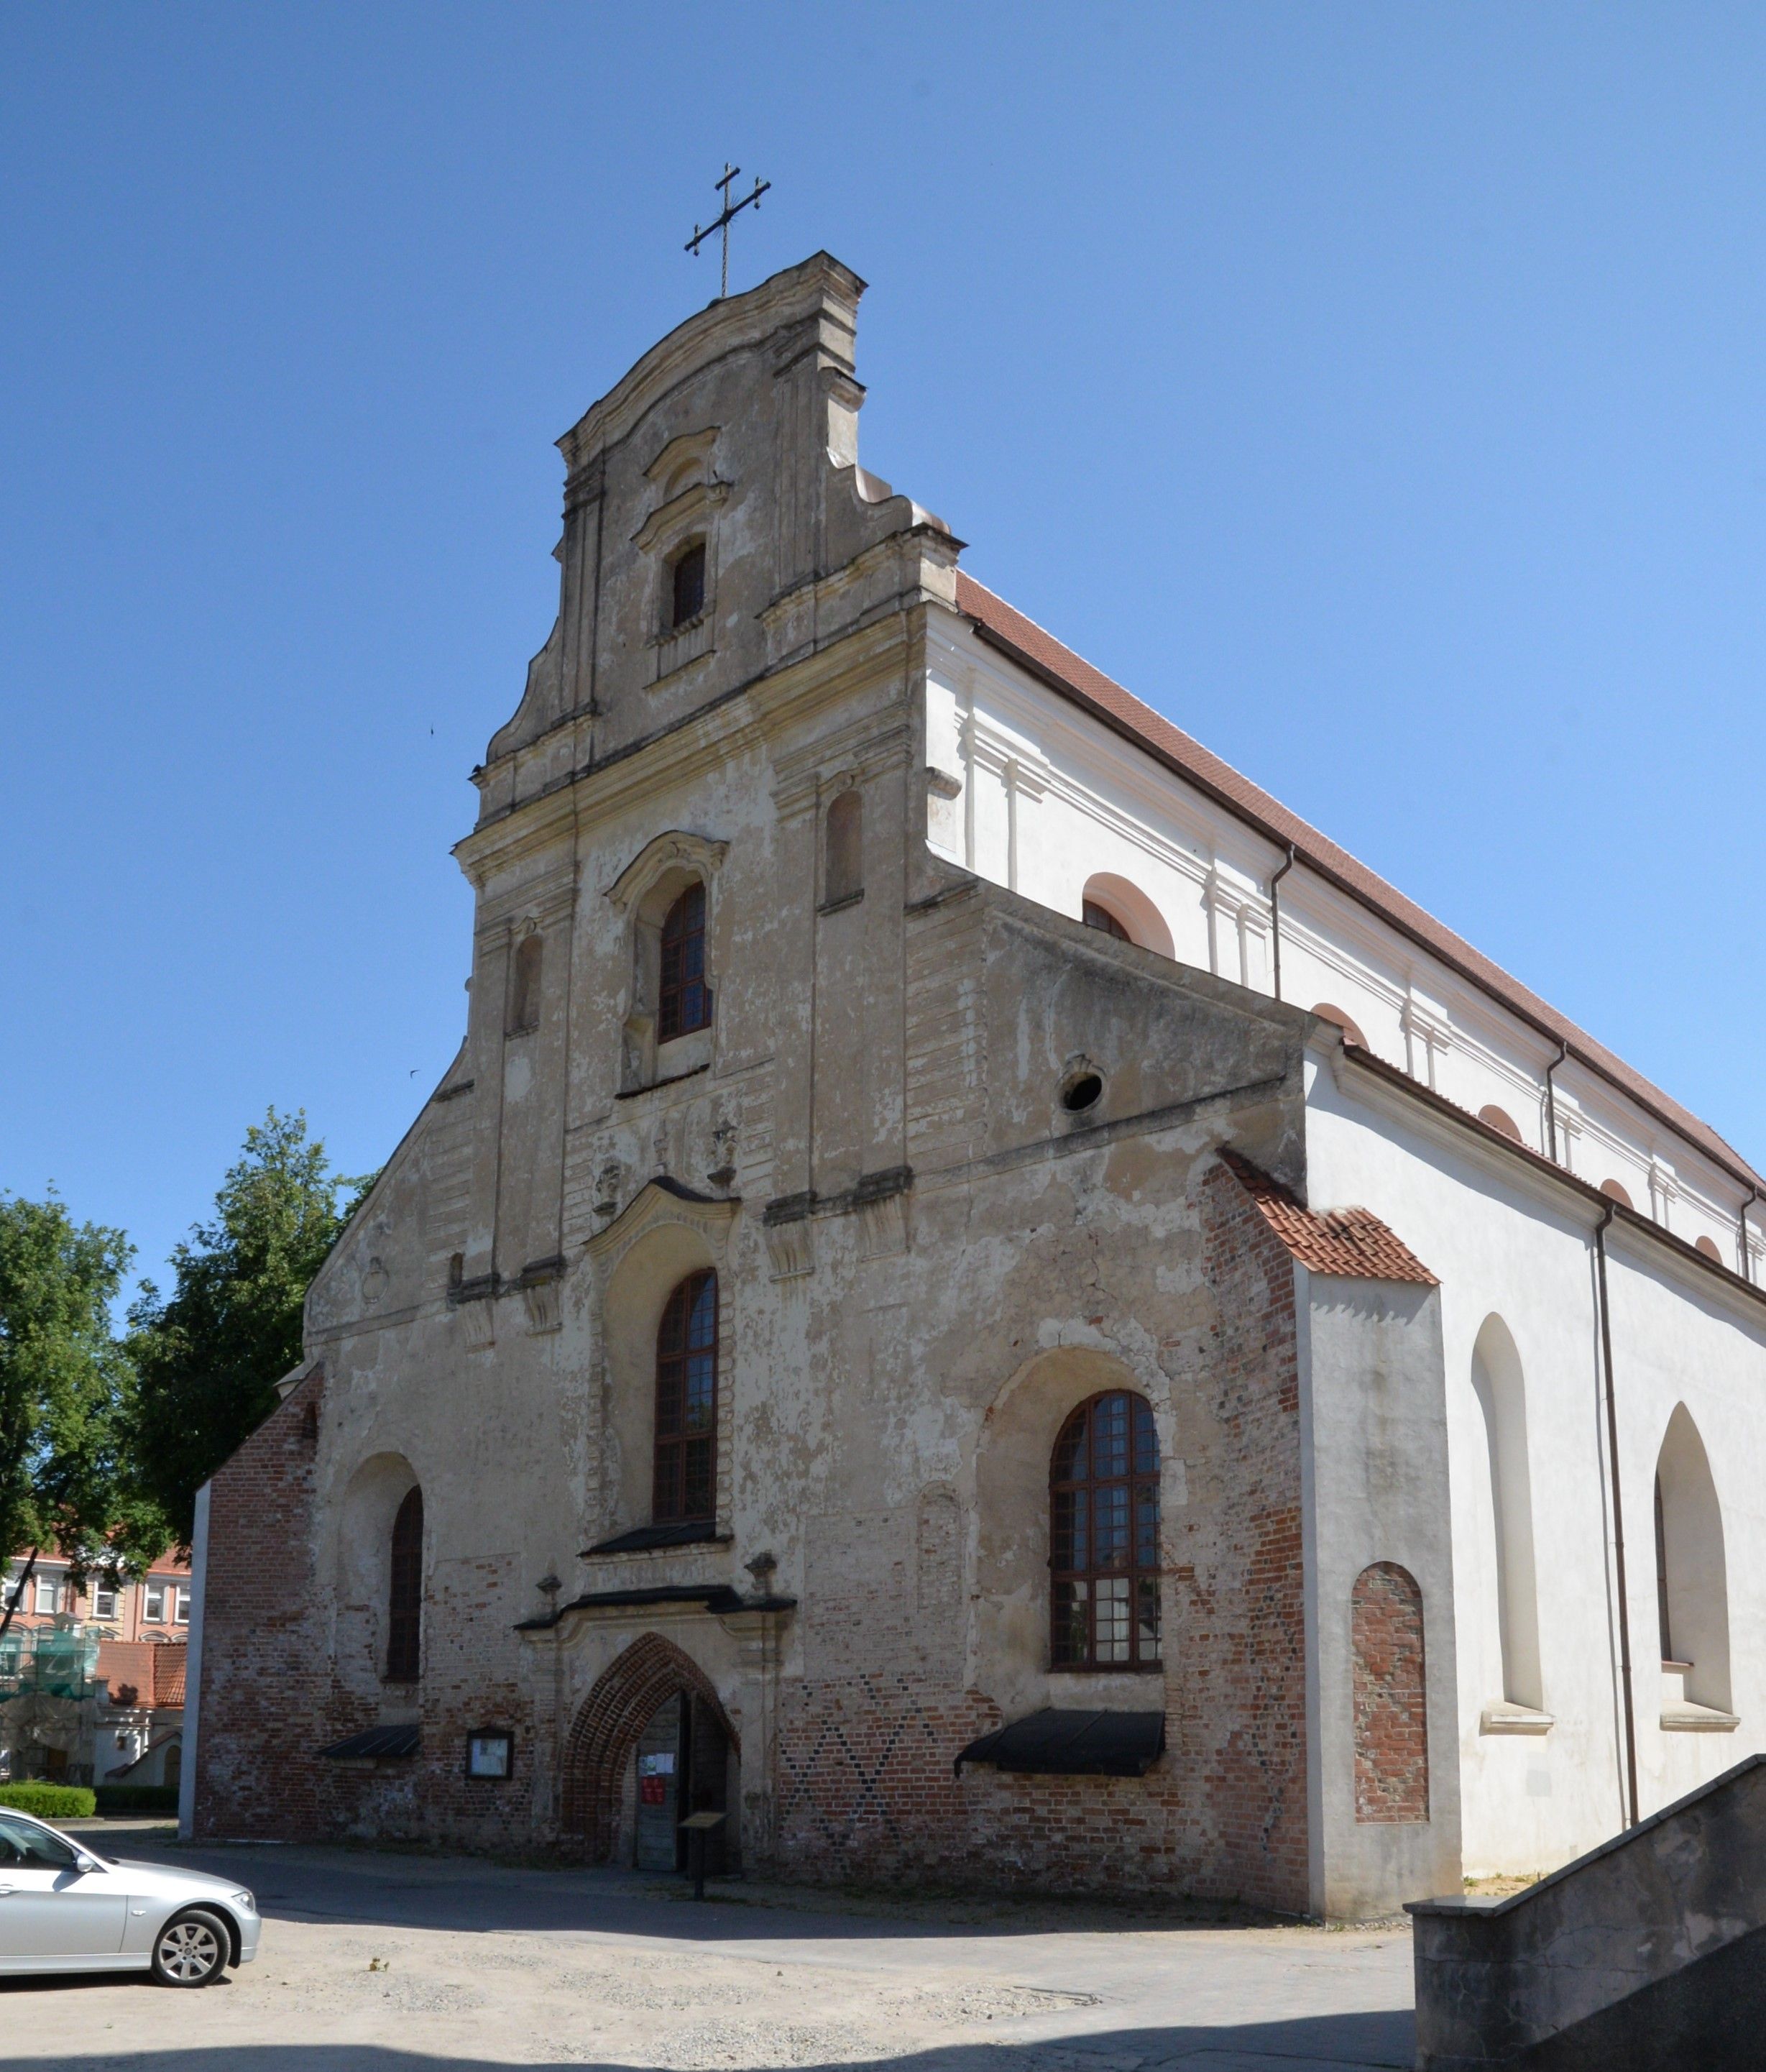 The Franciscan Church of the Blessed Virgin Mary in Vilnius